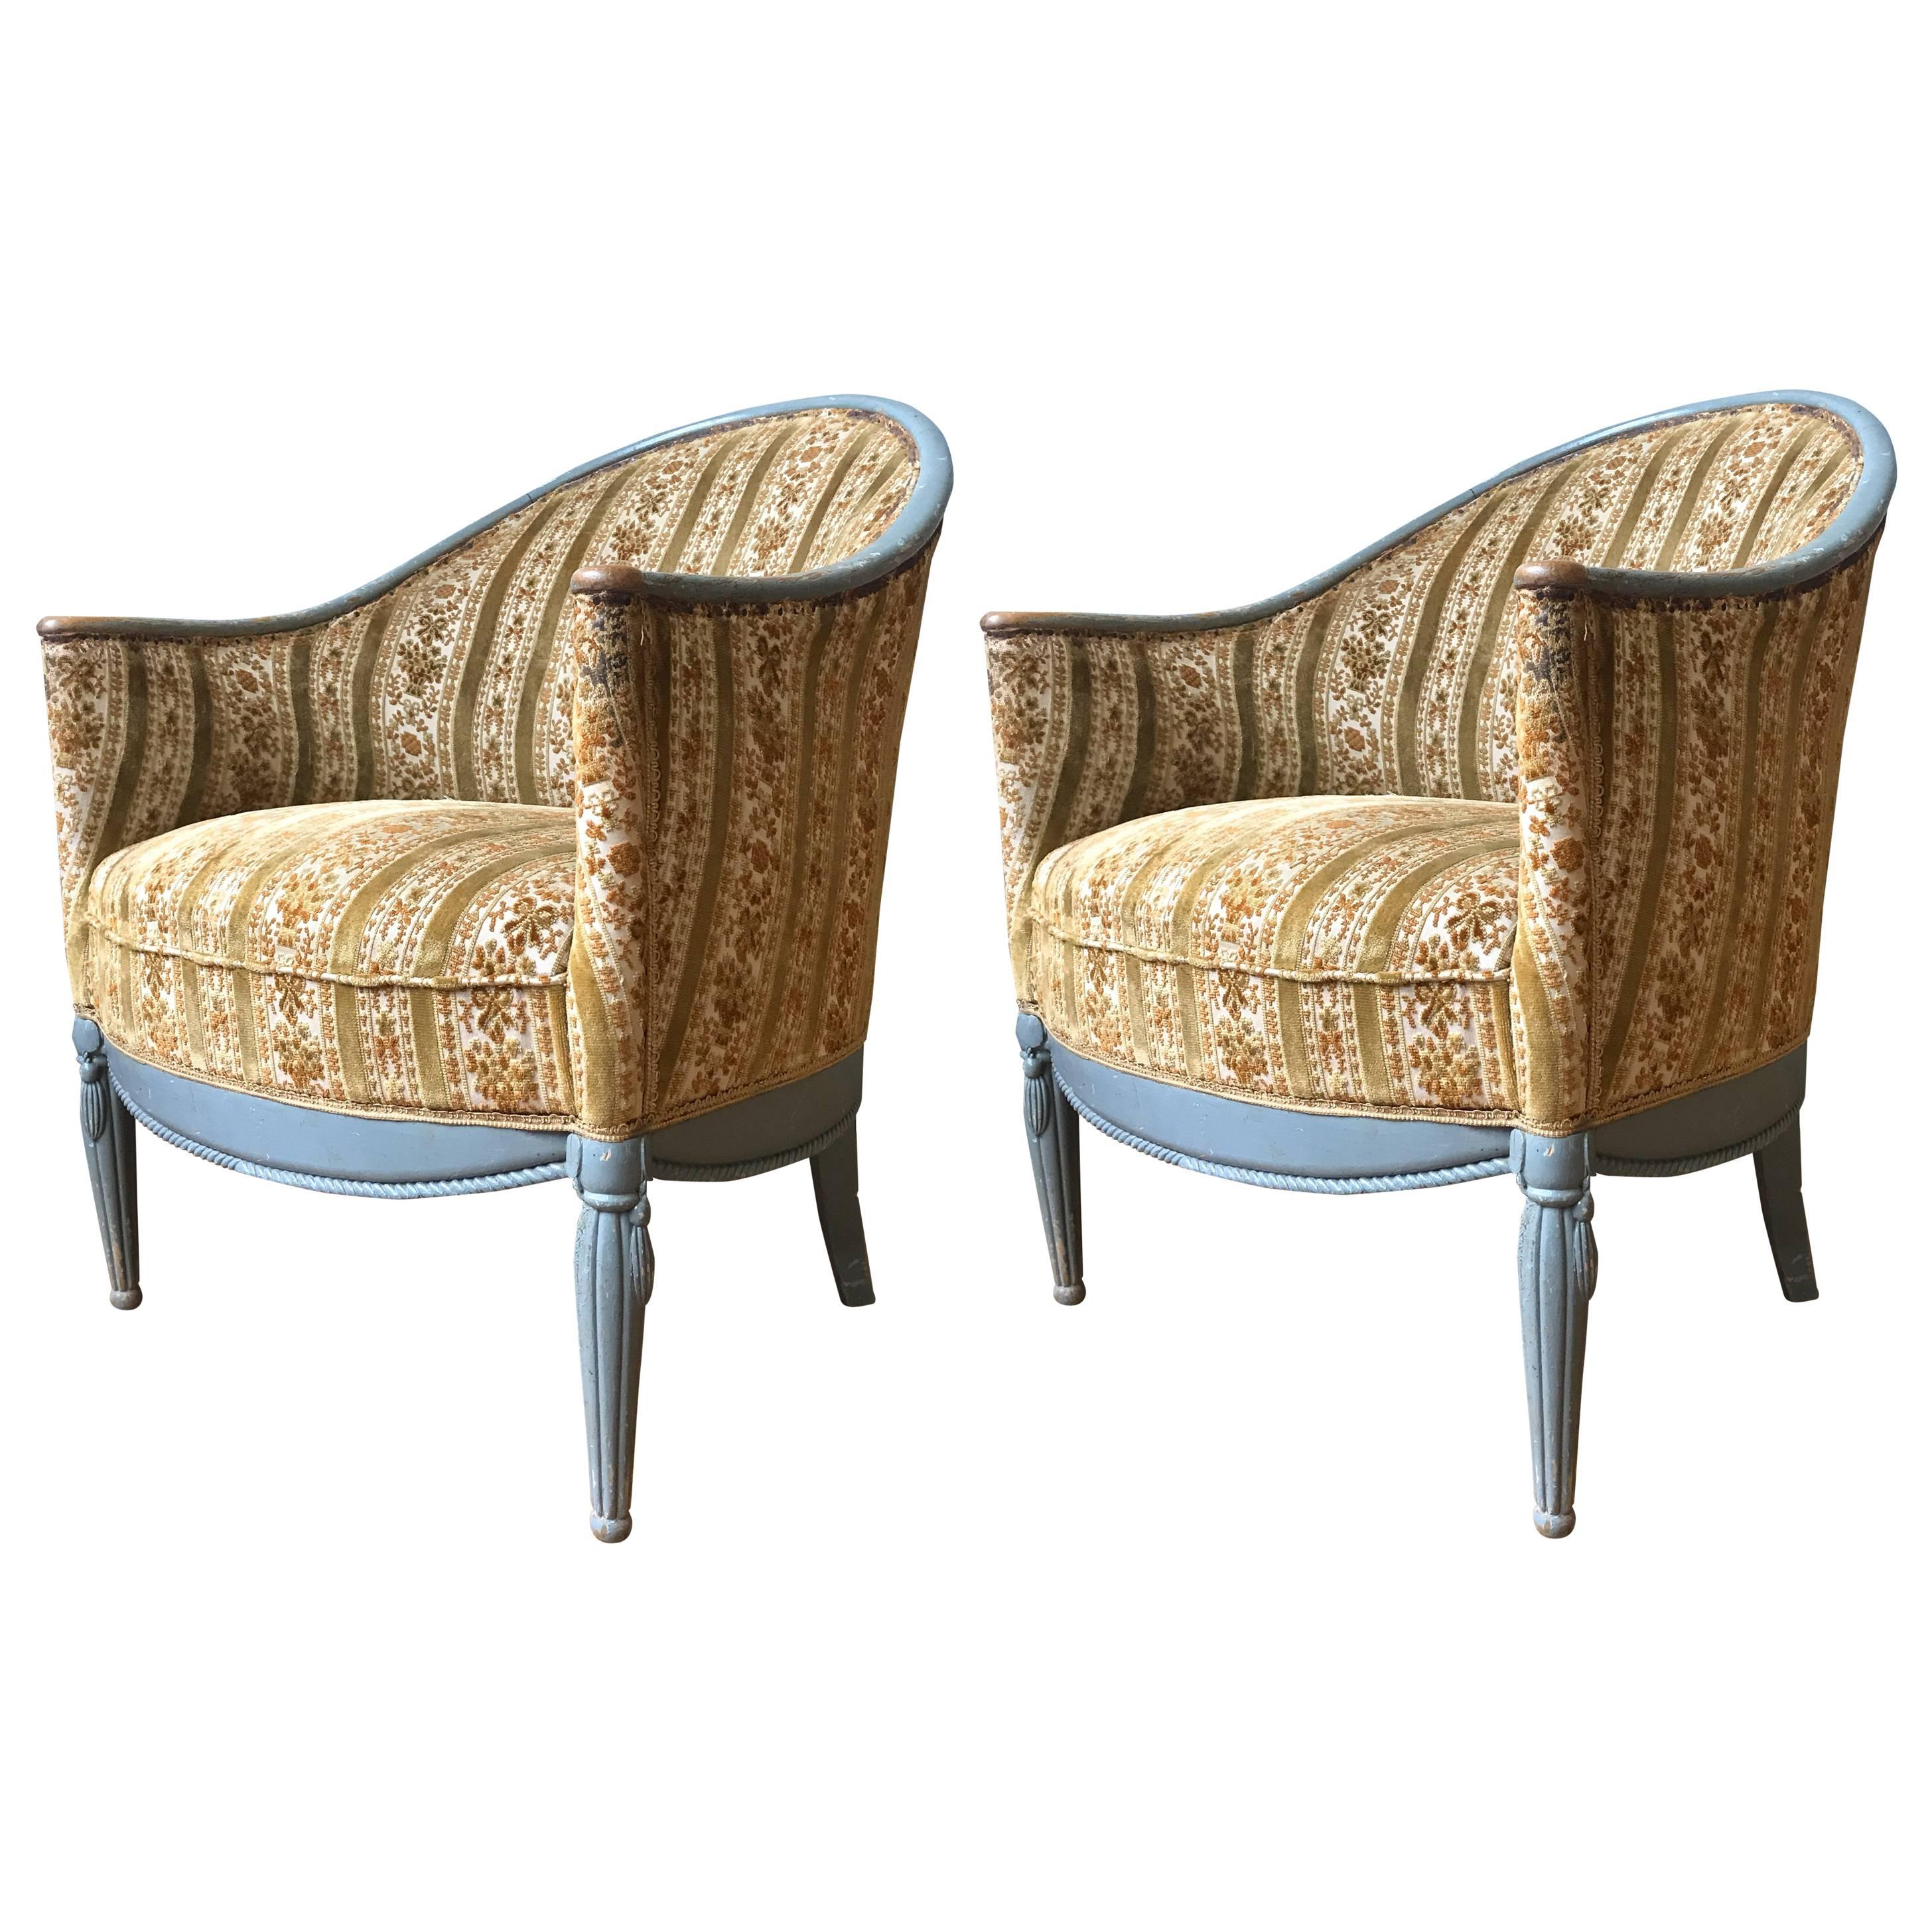 Pair of French Art Deco Style Armchairs